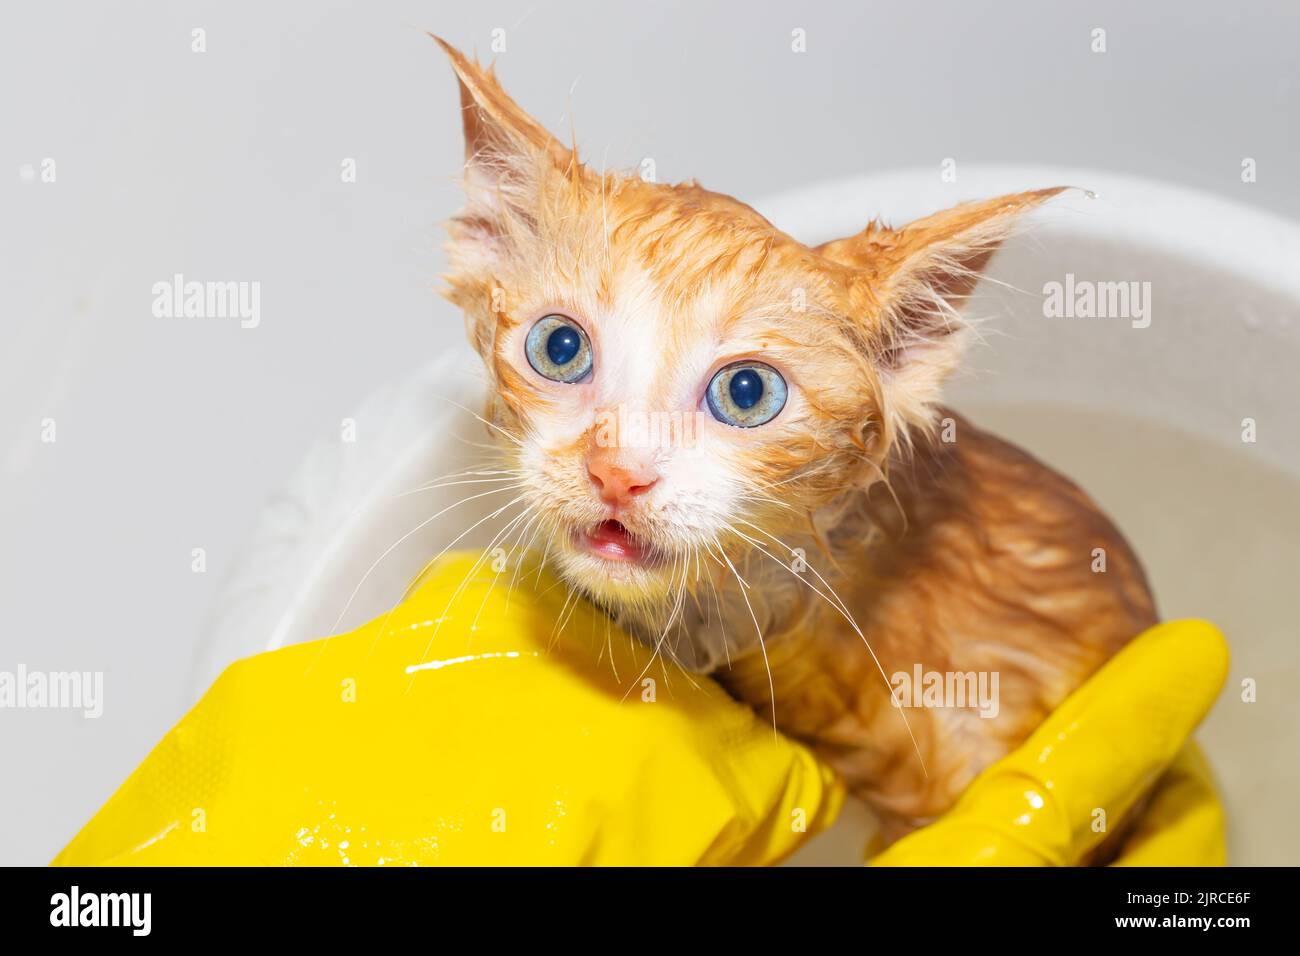 Wet funny frightened ginger kitten with bulging eyes takes a bath. A woman in gloves washes a cat. Stock Photo